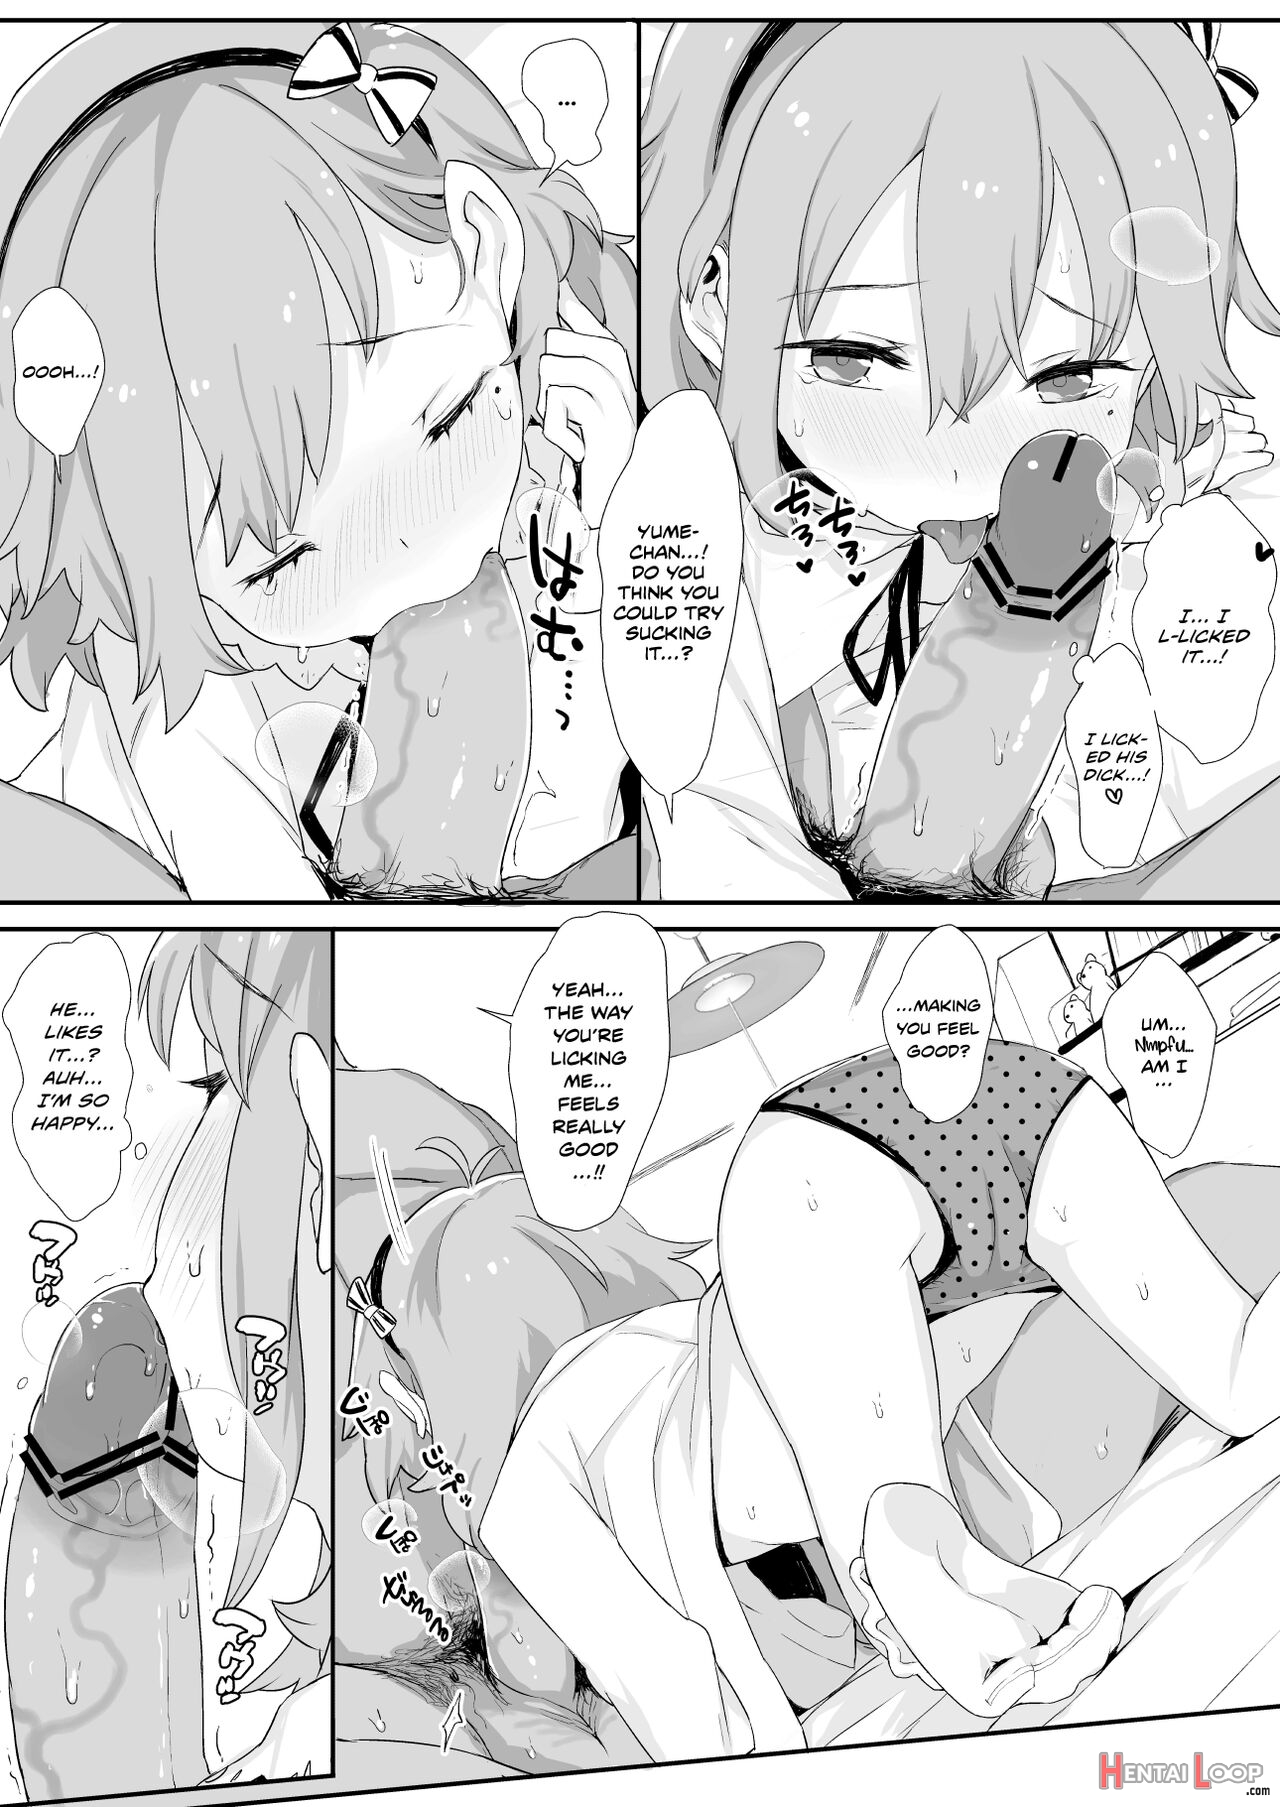 Hot 'n Steamy Babymaking Sex With Yume-chan! page 9